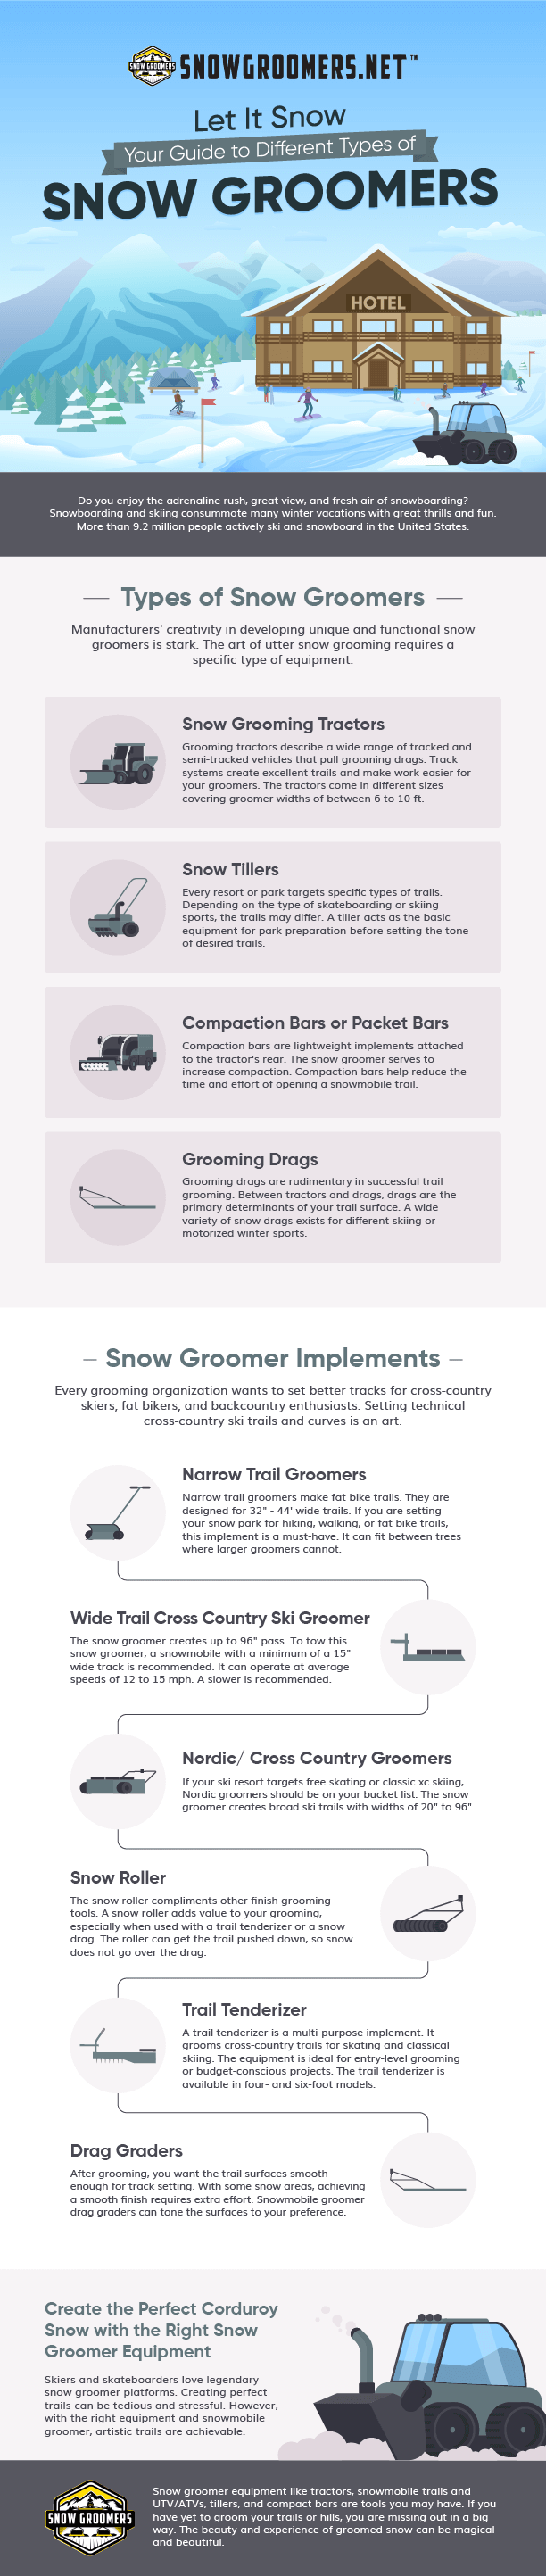 Types of snow groomers infographic